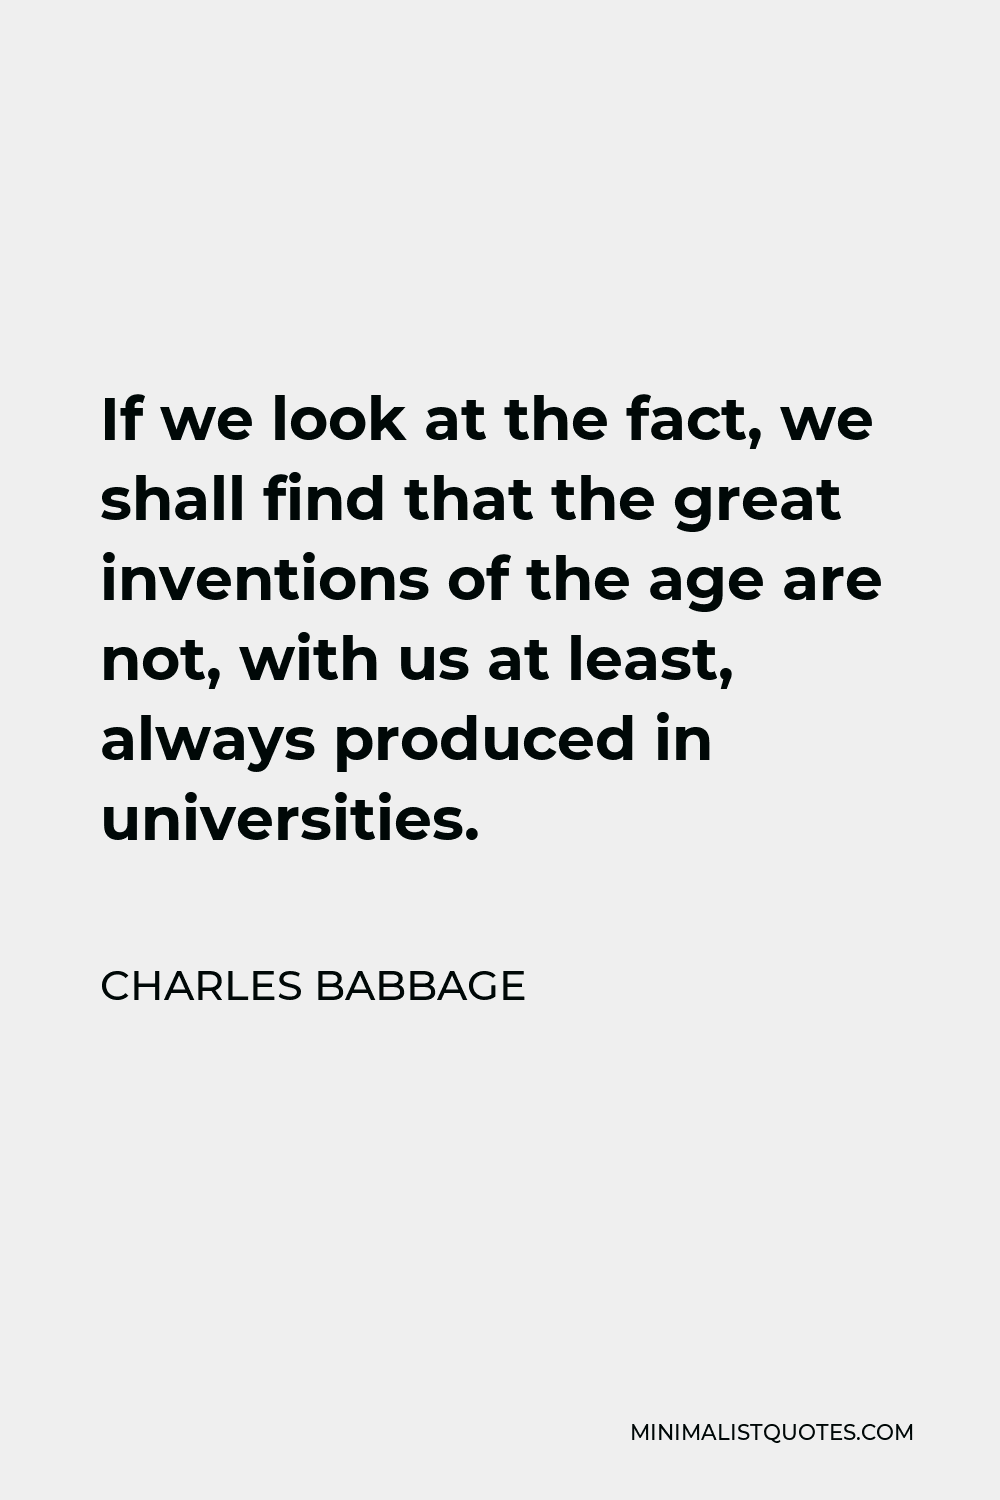 Charles Babbage Quote - If we look at the fact, we shall find that the great inventions of the age are not, with us at least, always produced in universities.